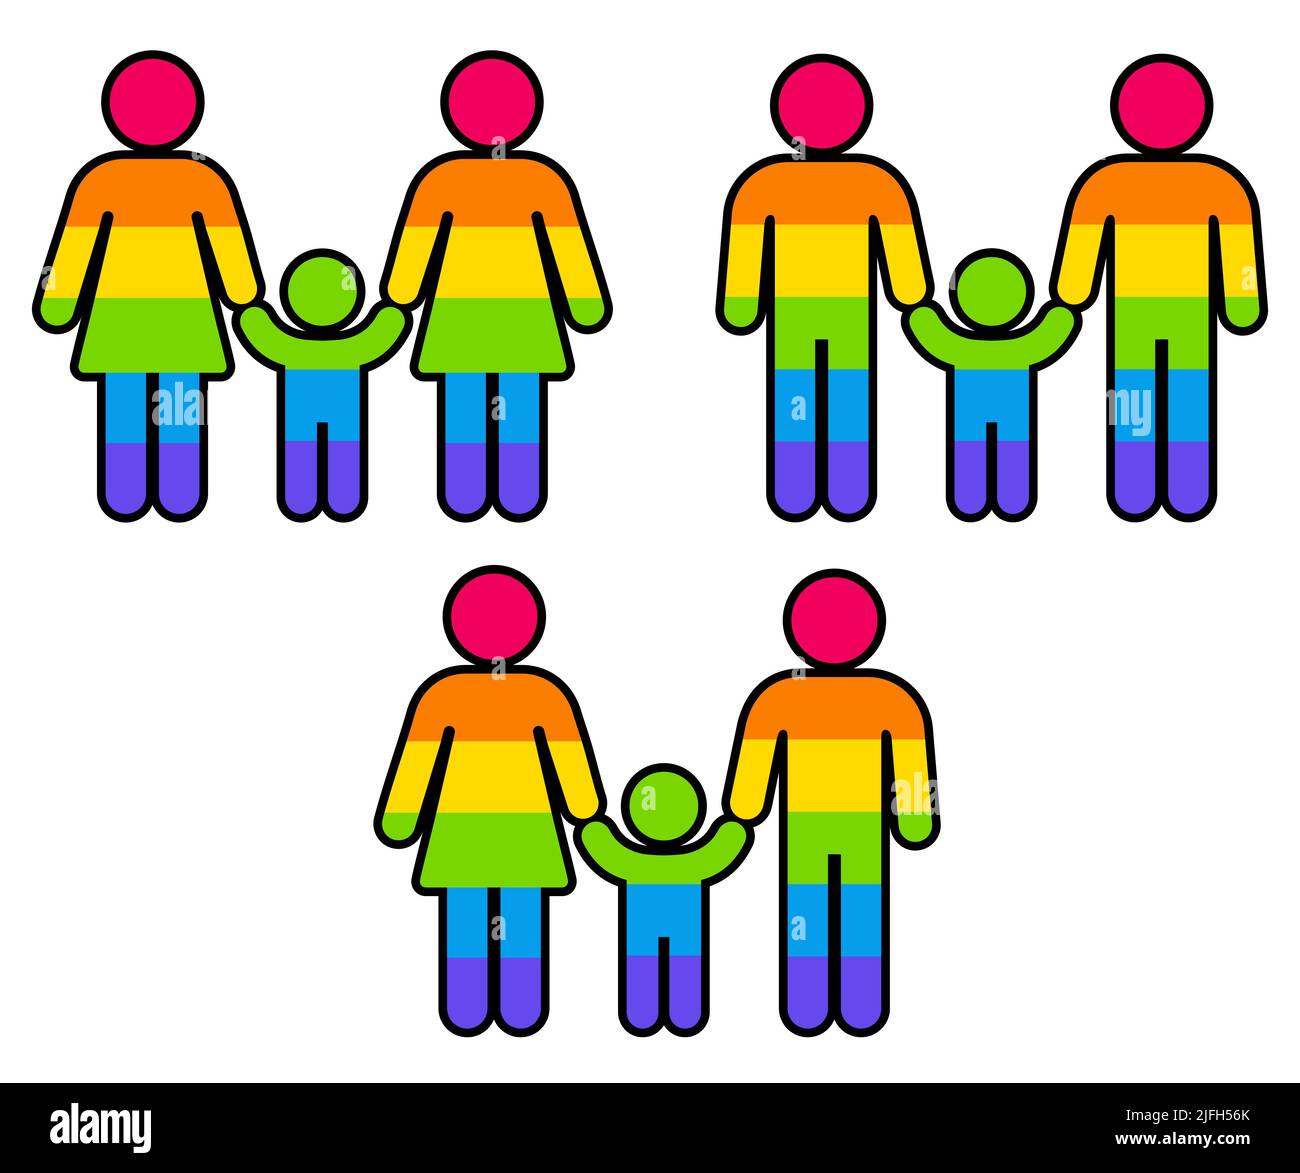 Parents and child icon holding hands, rainbow pride flag colors. Two moms, two dads, mom and dad. Simple LGBT family stickers, vector symbol set. Stock Vector